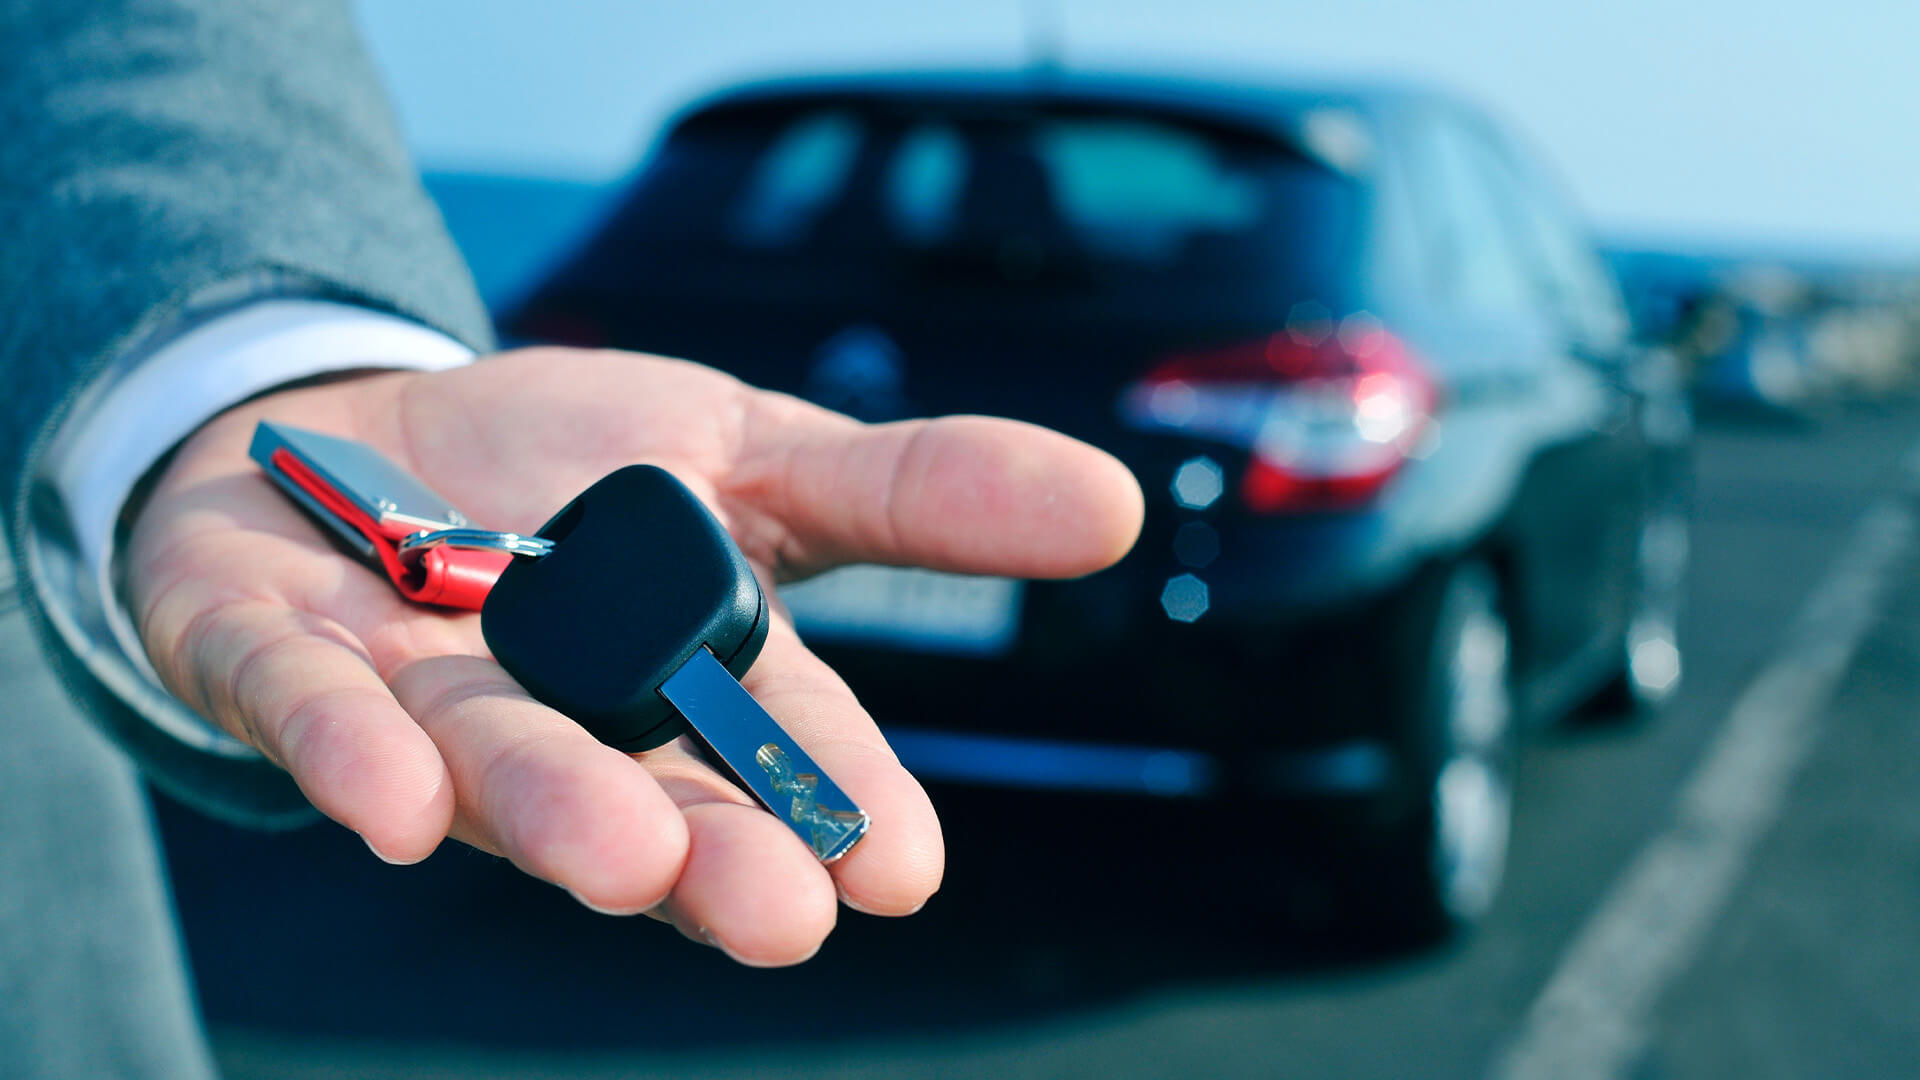 Someone holding the keys to a company car. The car in out of focus in the background